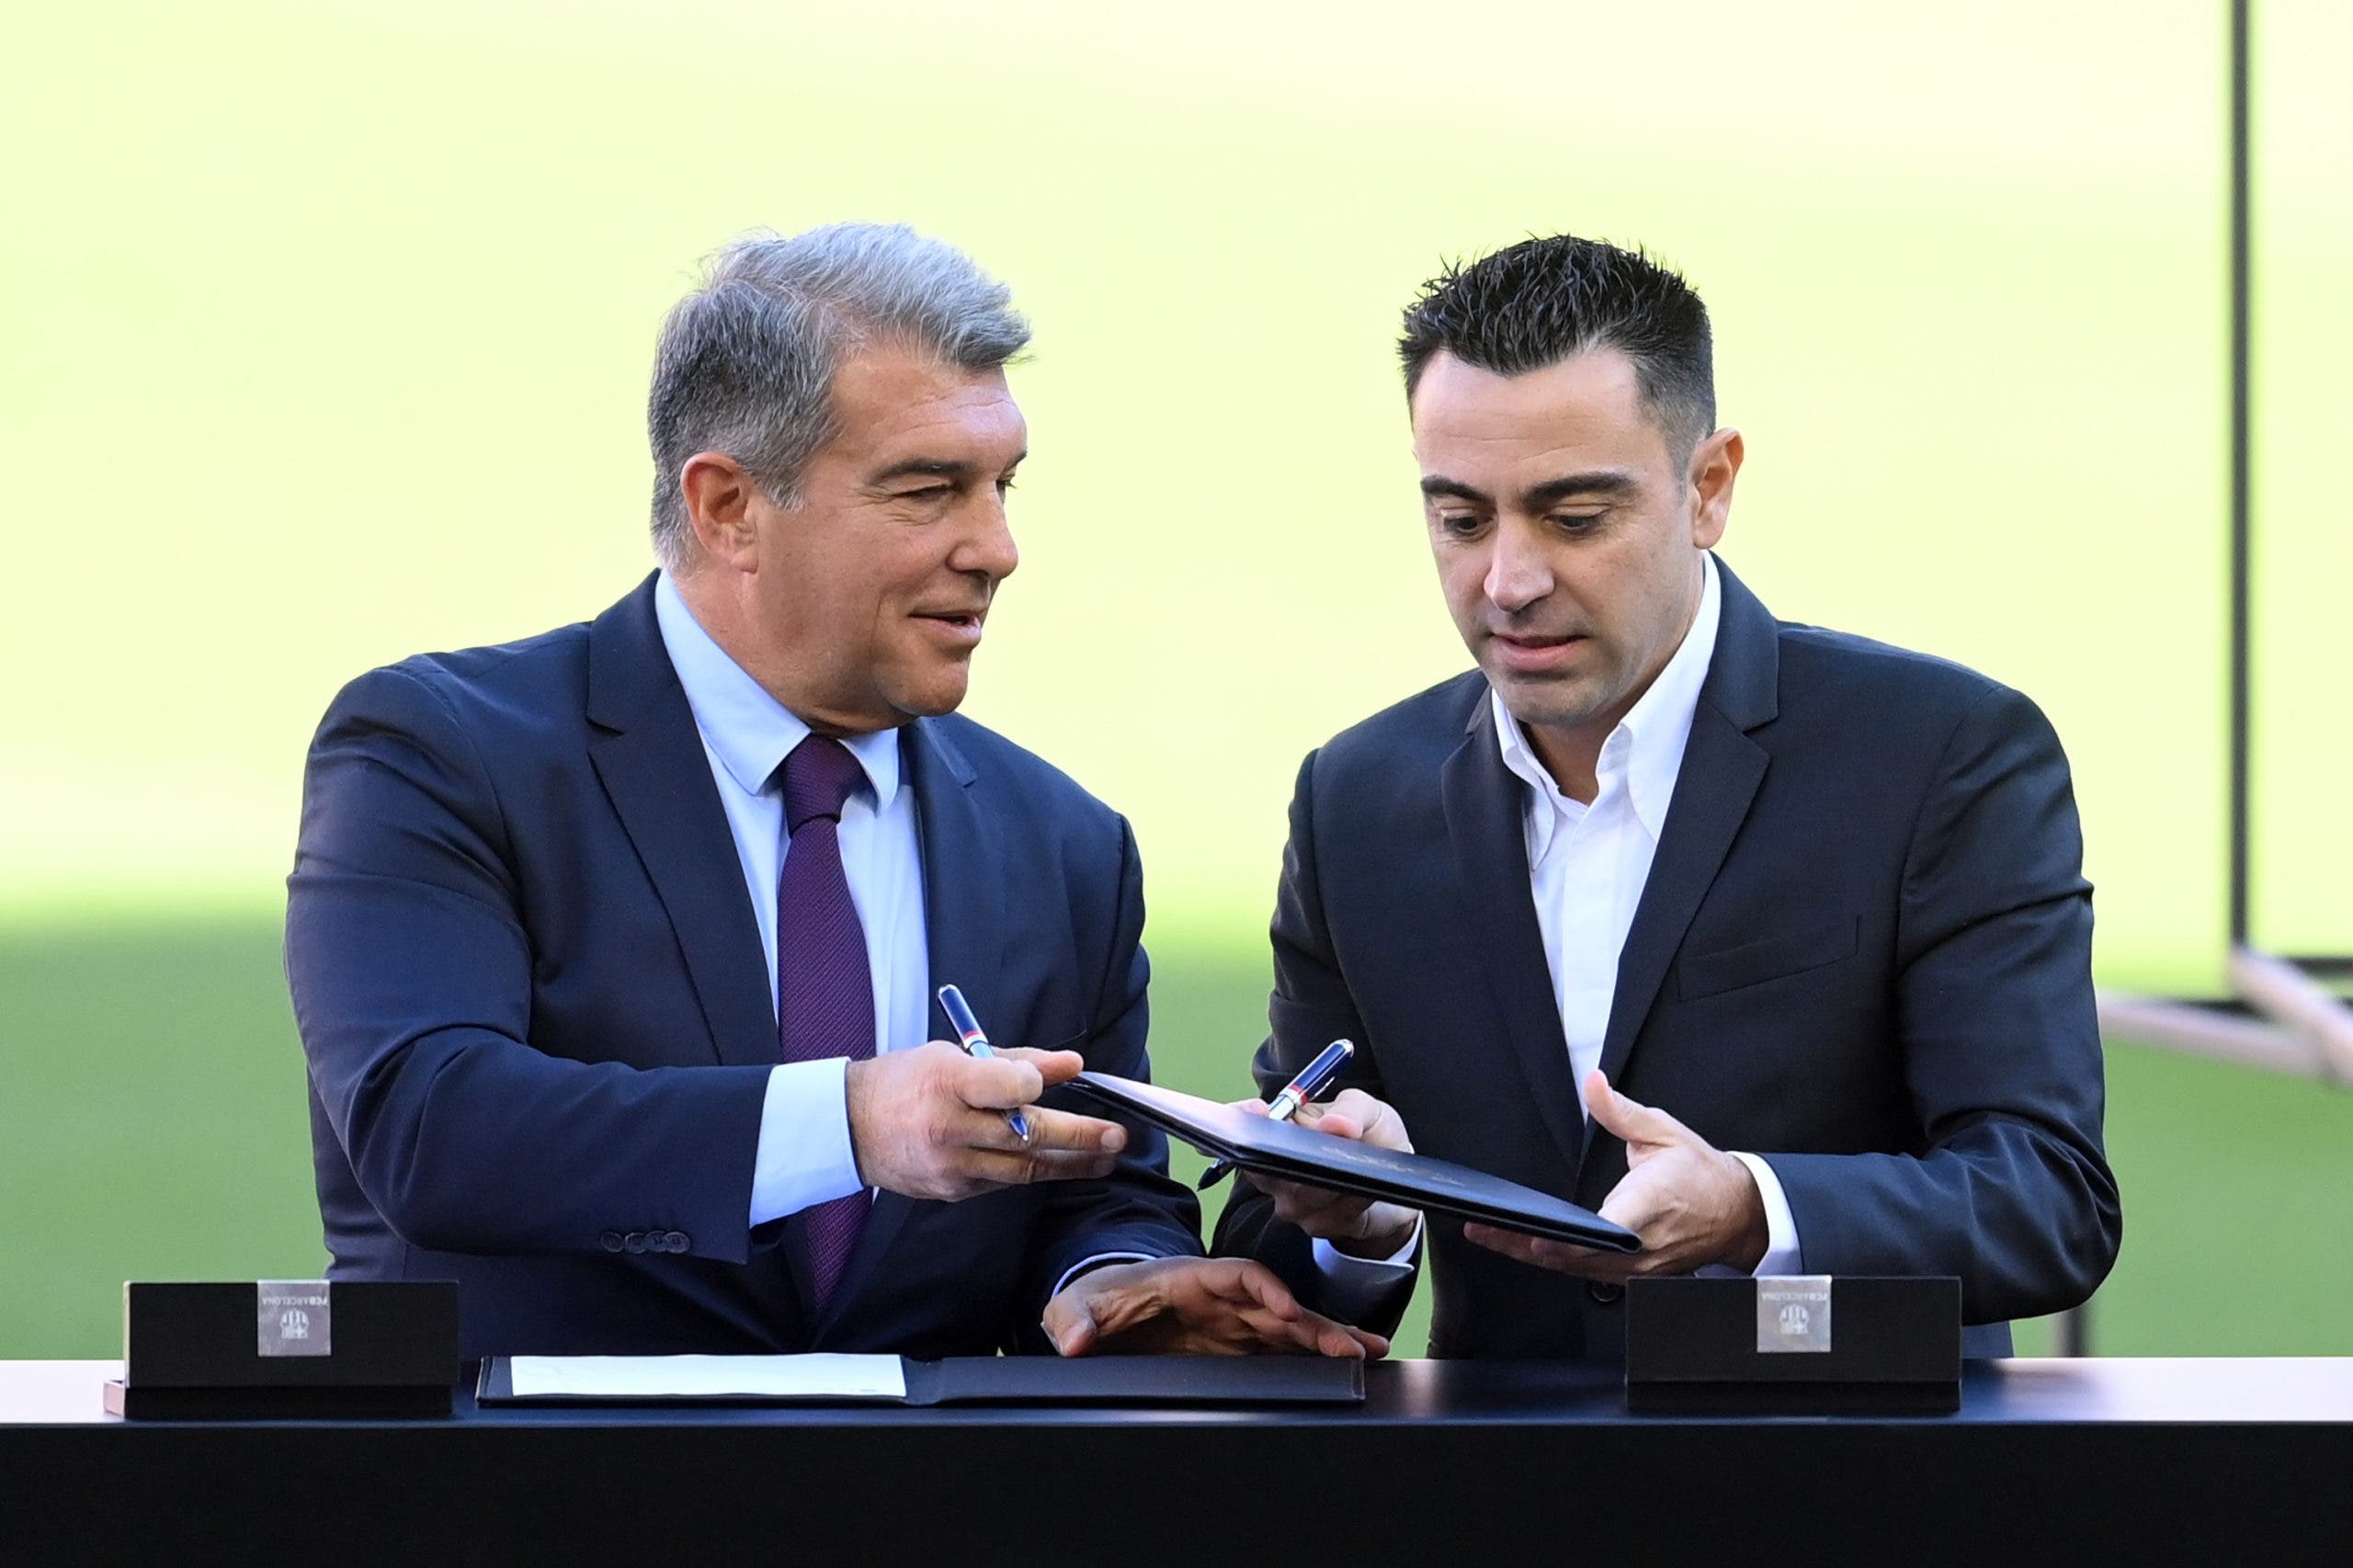 Laporta negotiates his sale to the Premier while Xavi ensures that he stays at FC Barcelona
	
